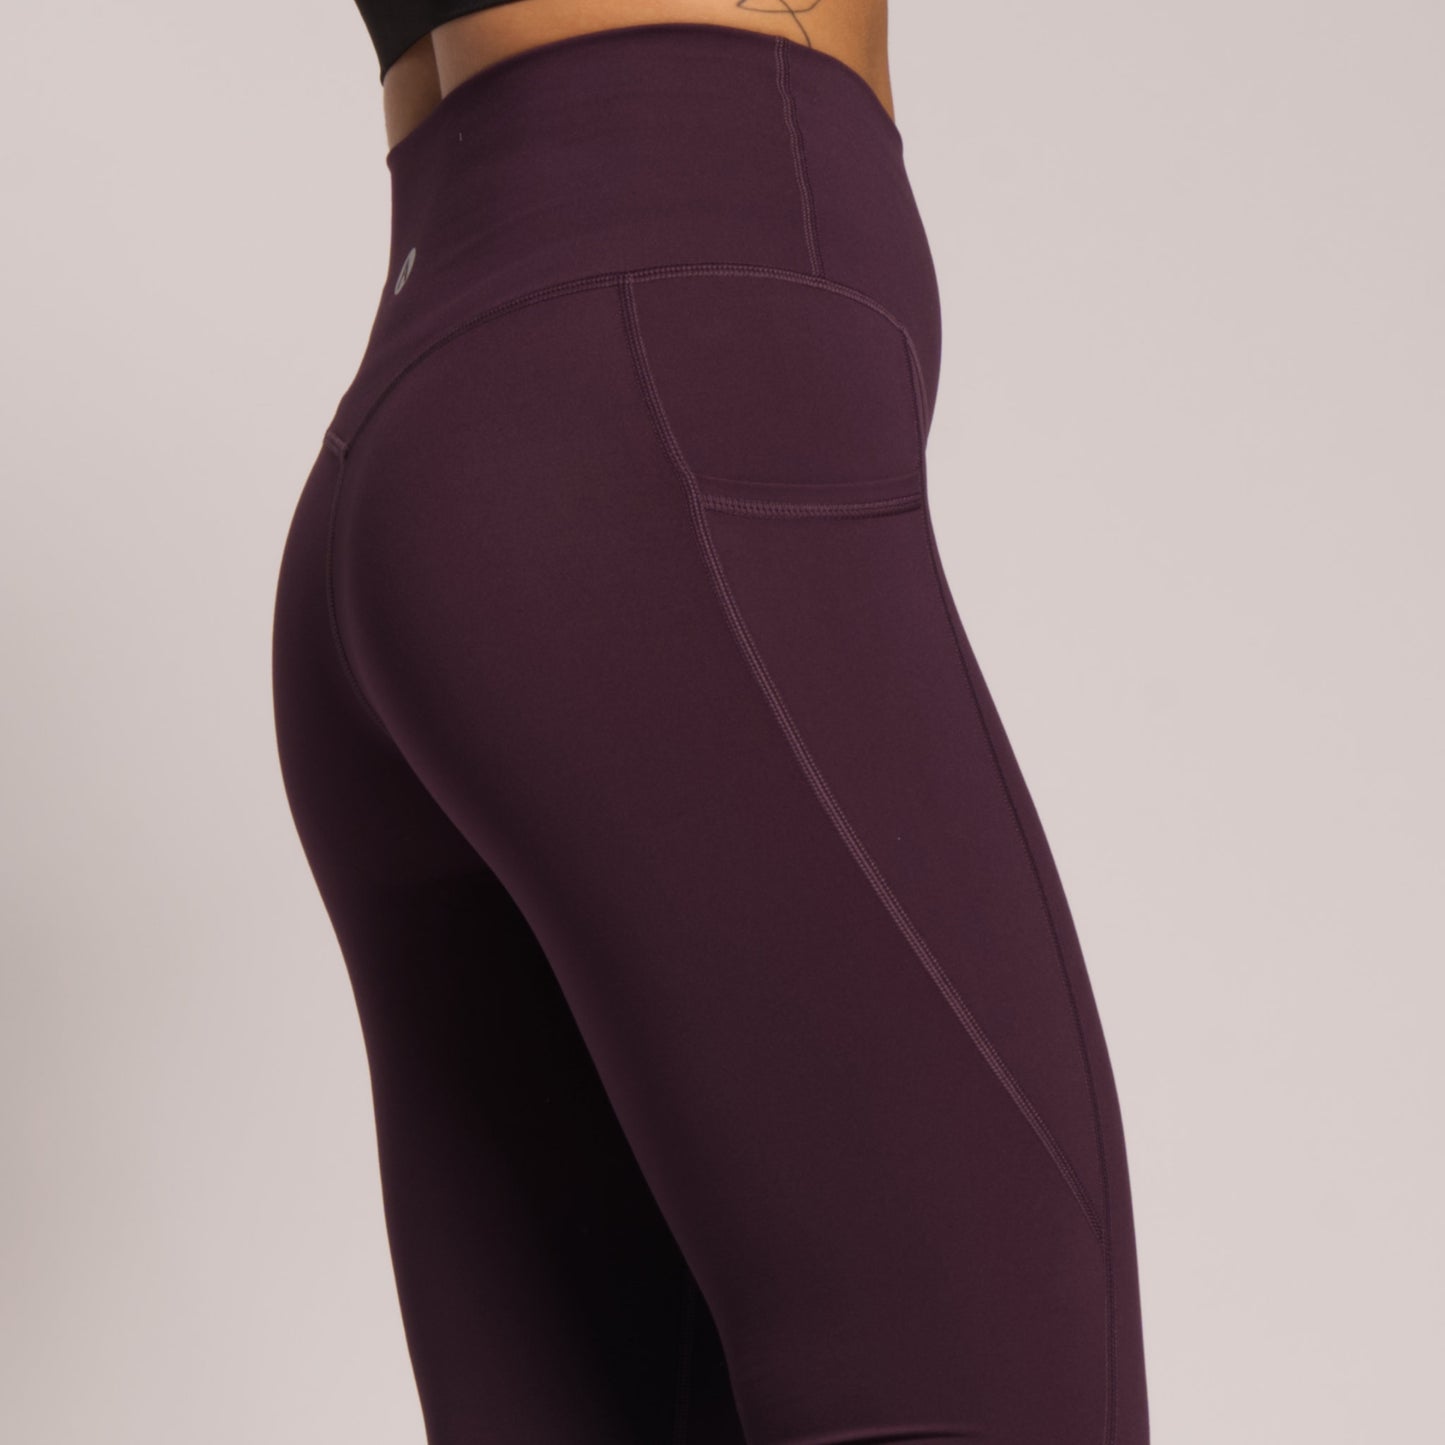 Gym leggings with pockets 